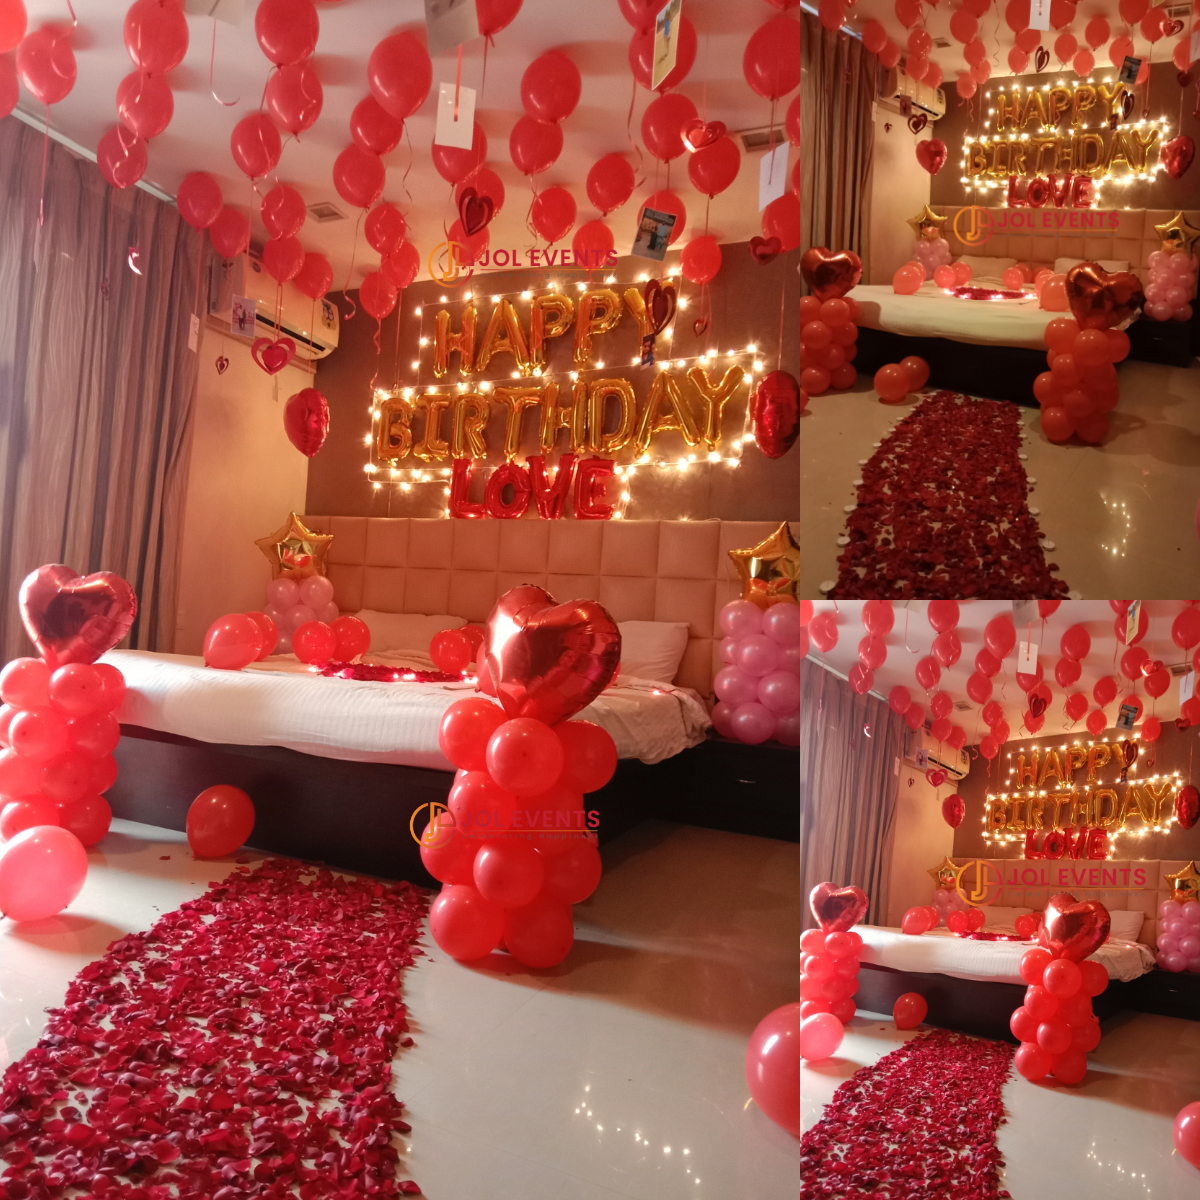 20+ valentine's day room decoration ideas for him that he will surely love